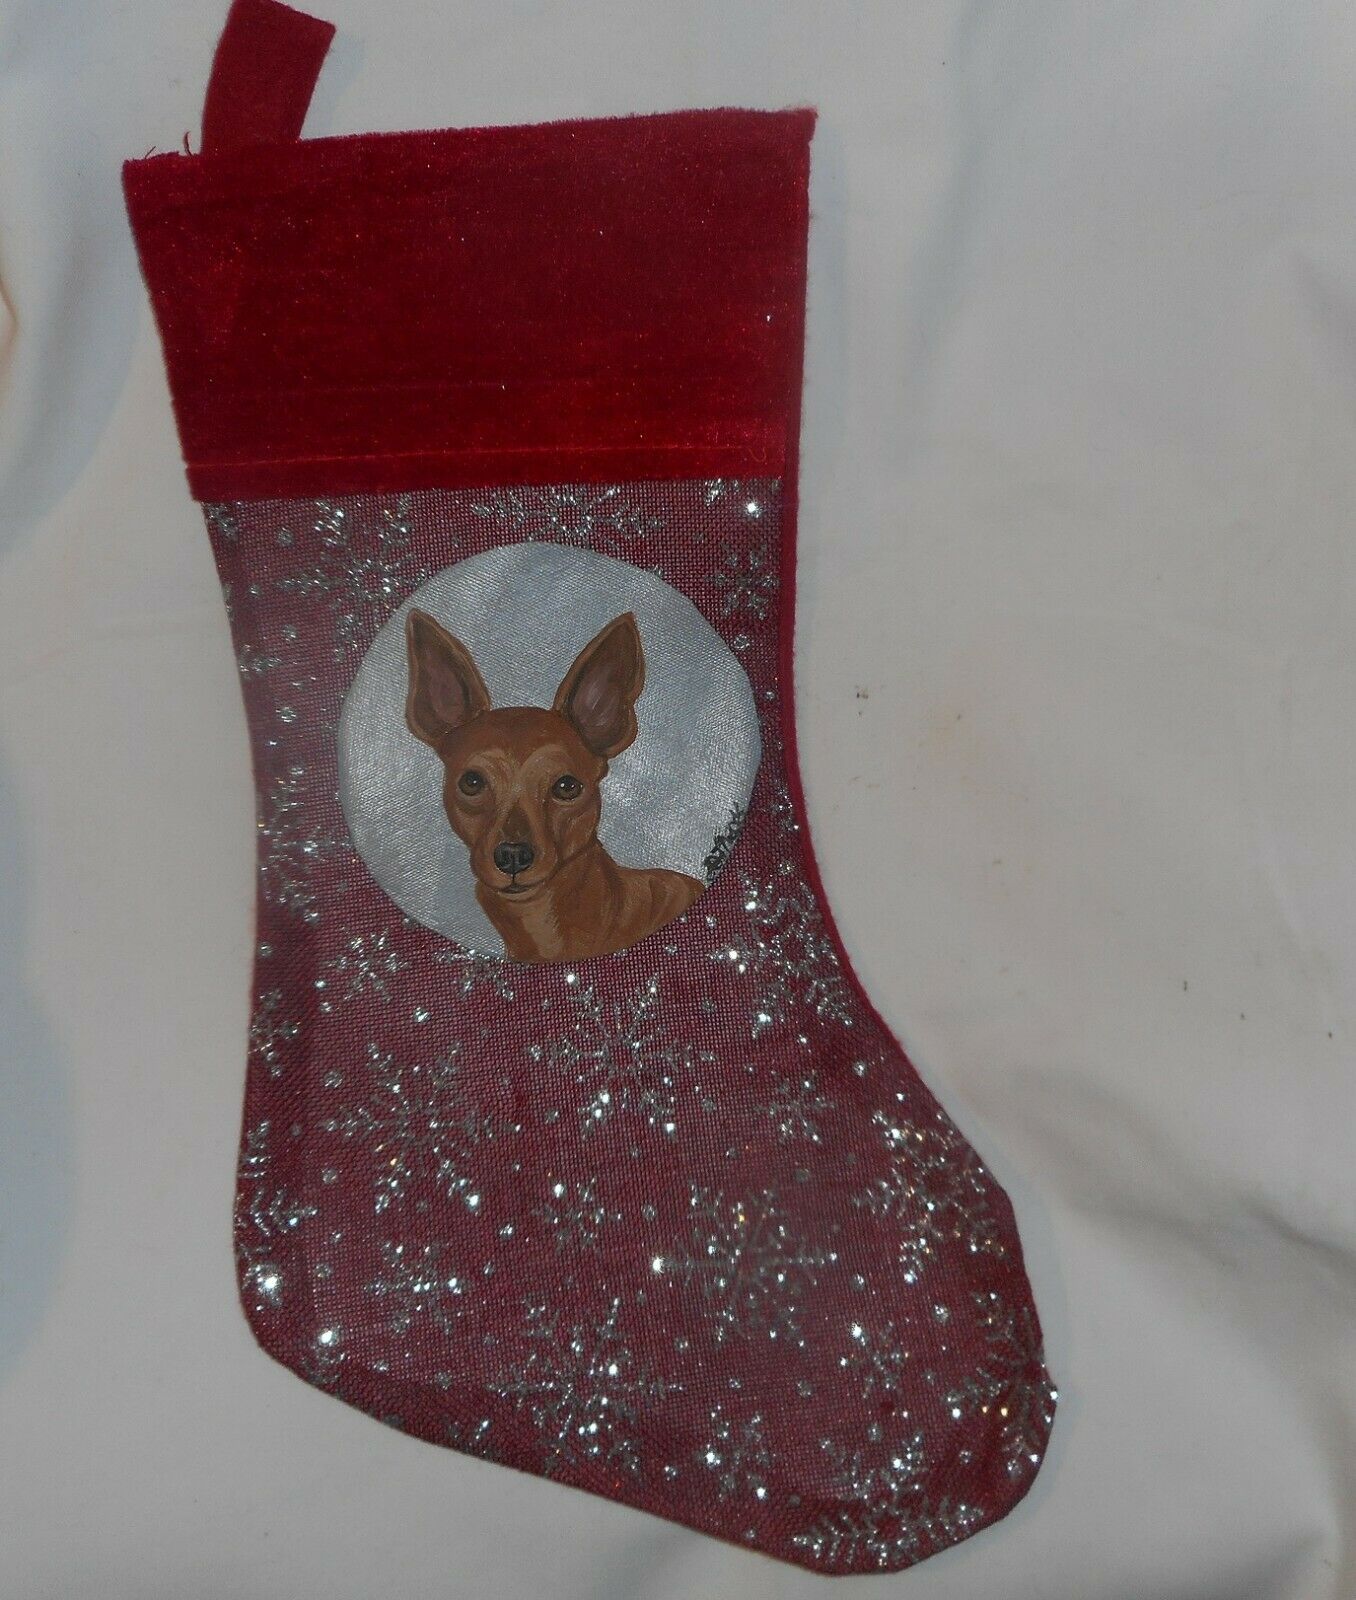 Red Miniature Pinscher Dog Hand Painted Christmas Stocking Decoration